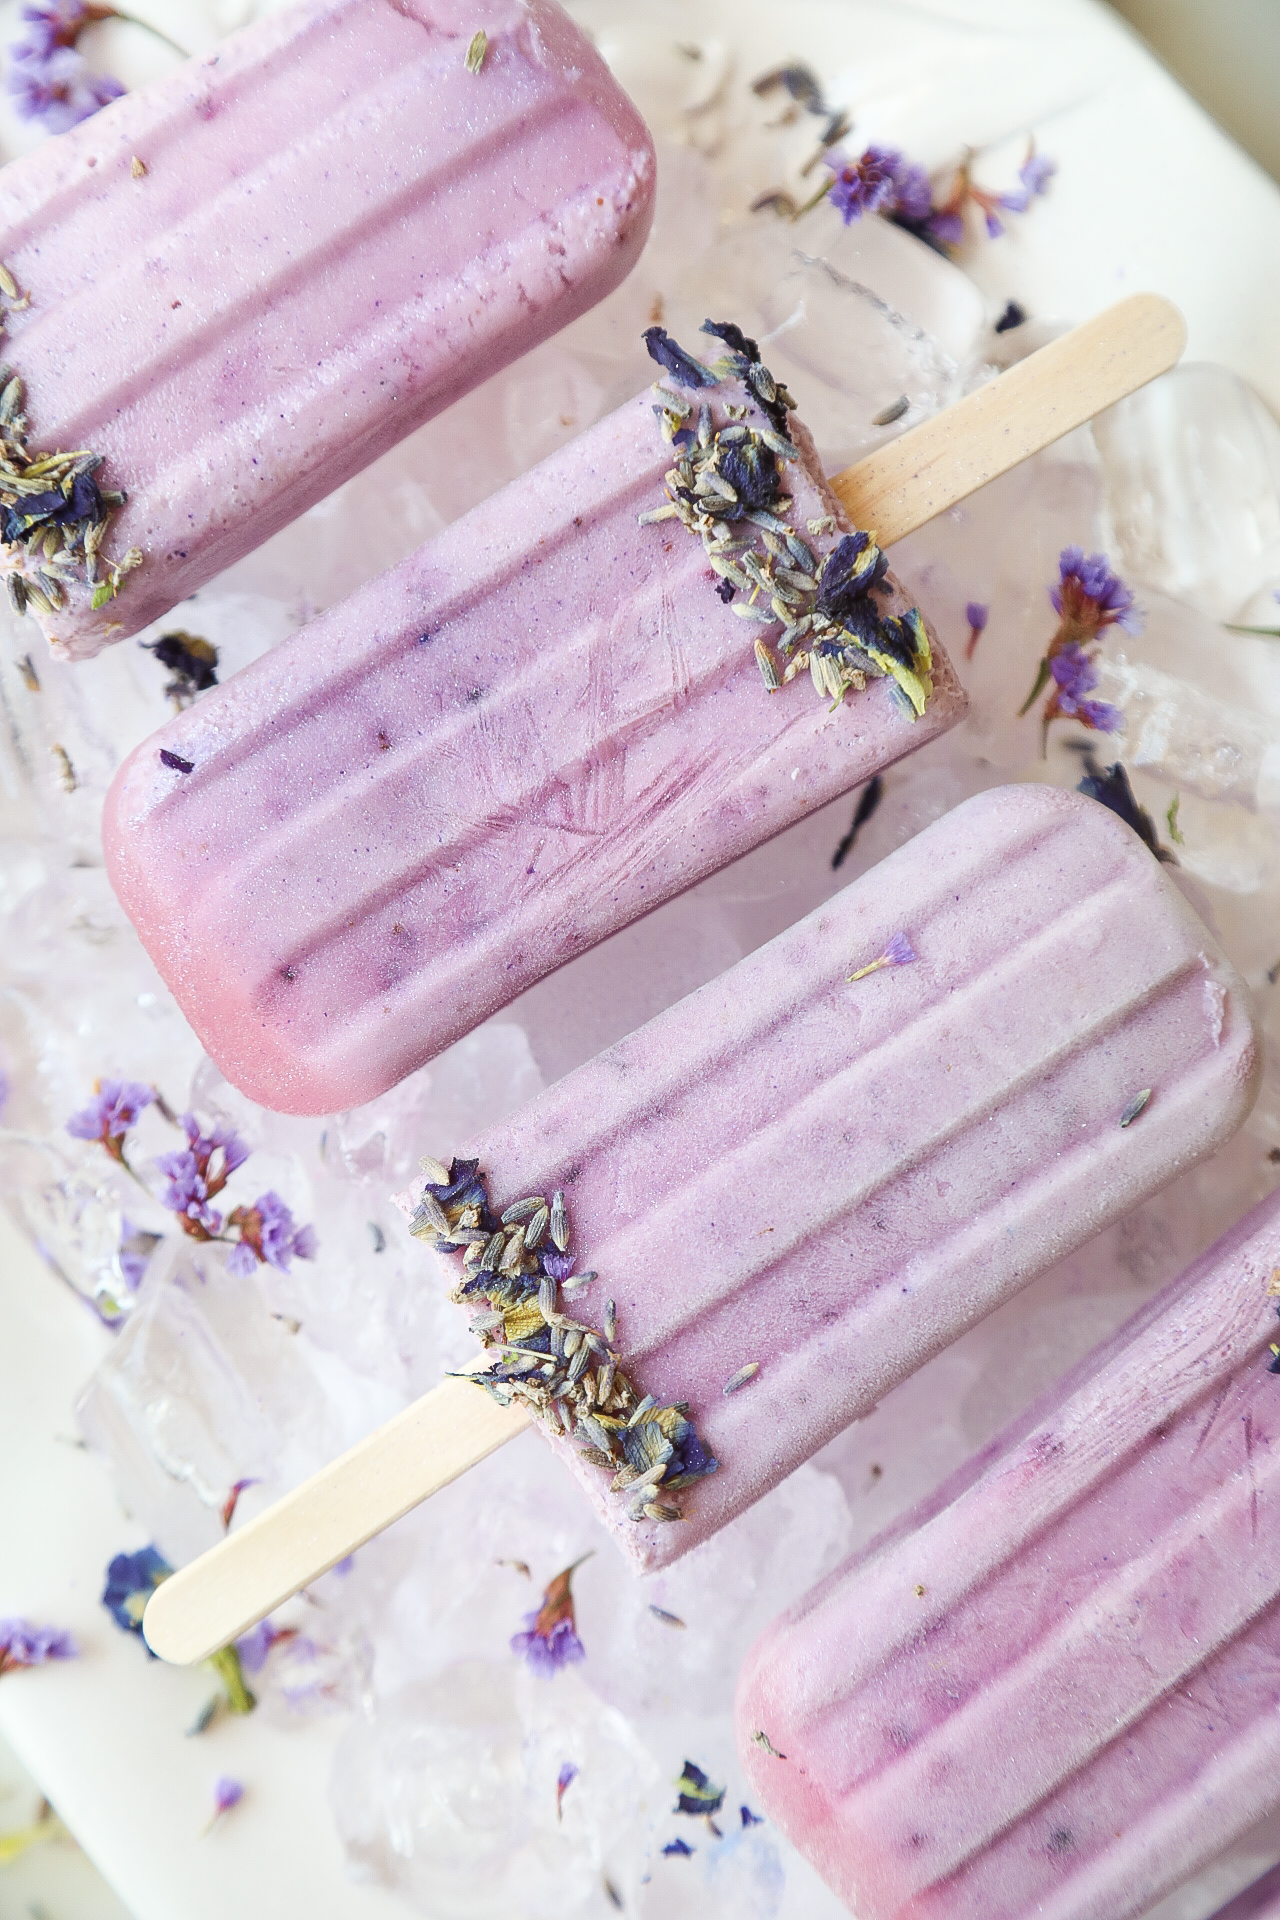 Boozy Lavender Blueberry Creamsicles made with Empress Gin. #creamsicles #dessert #lavender #blueberry #gin